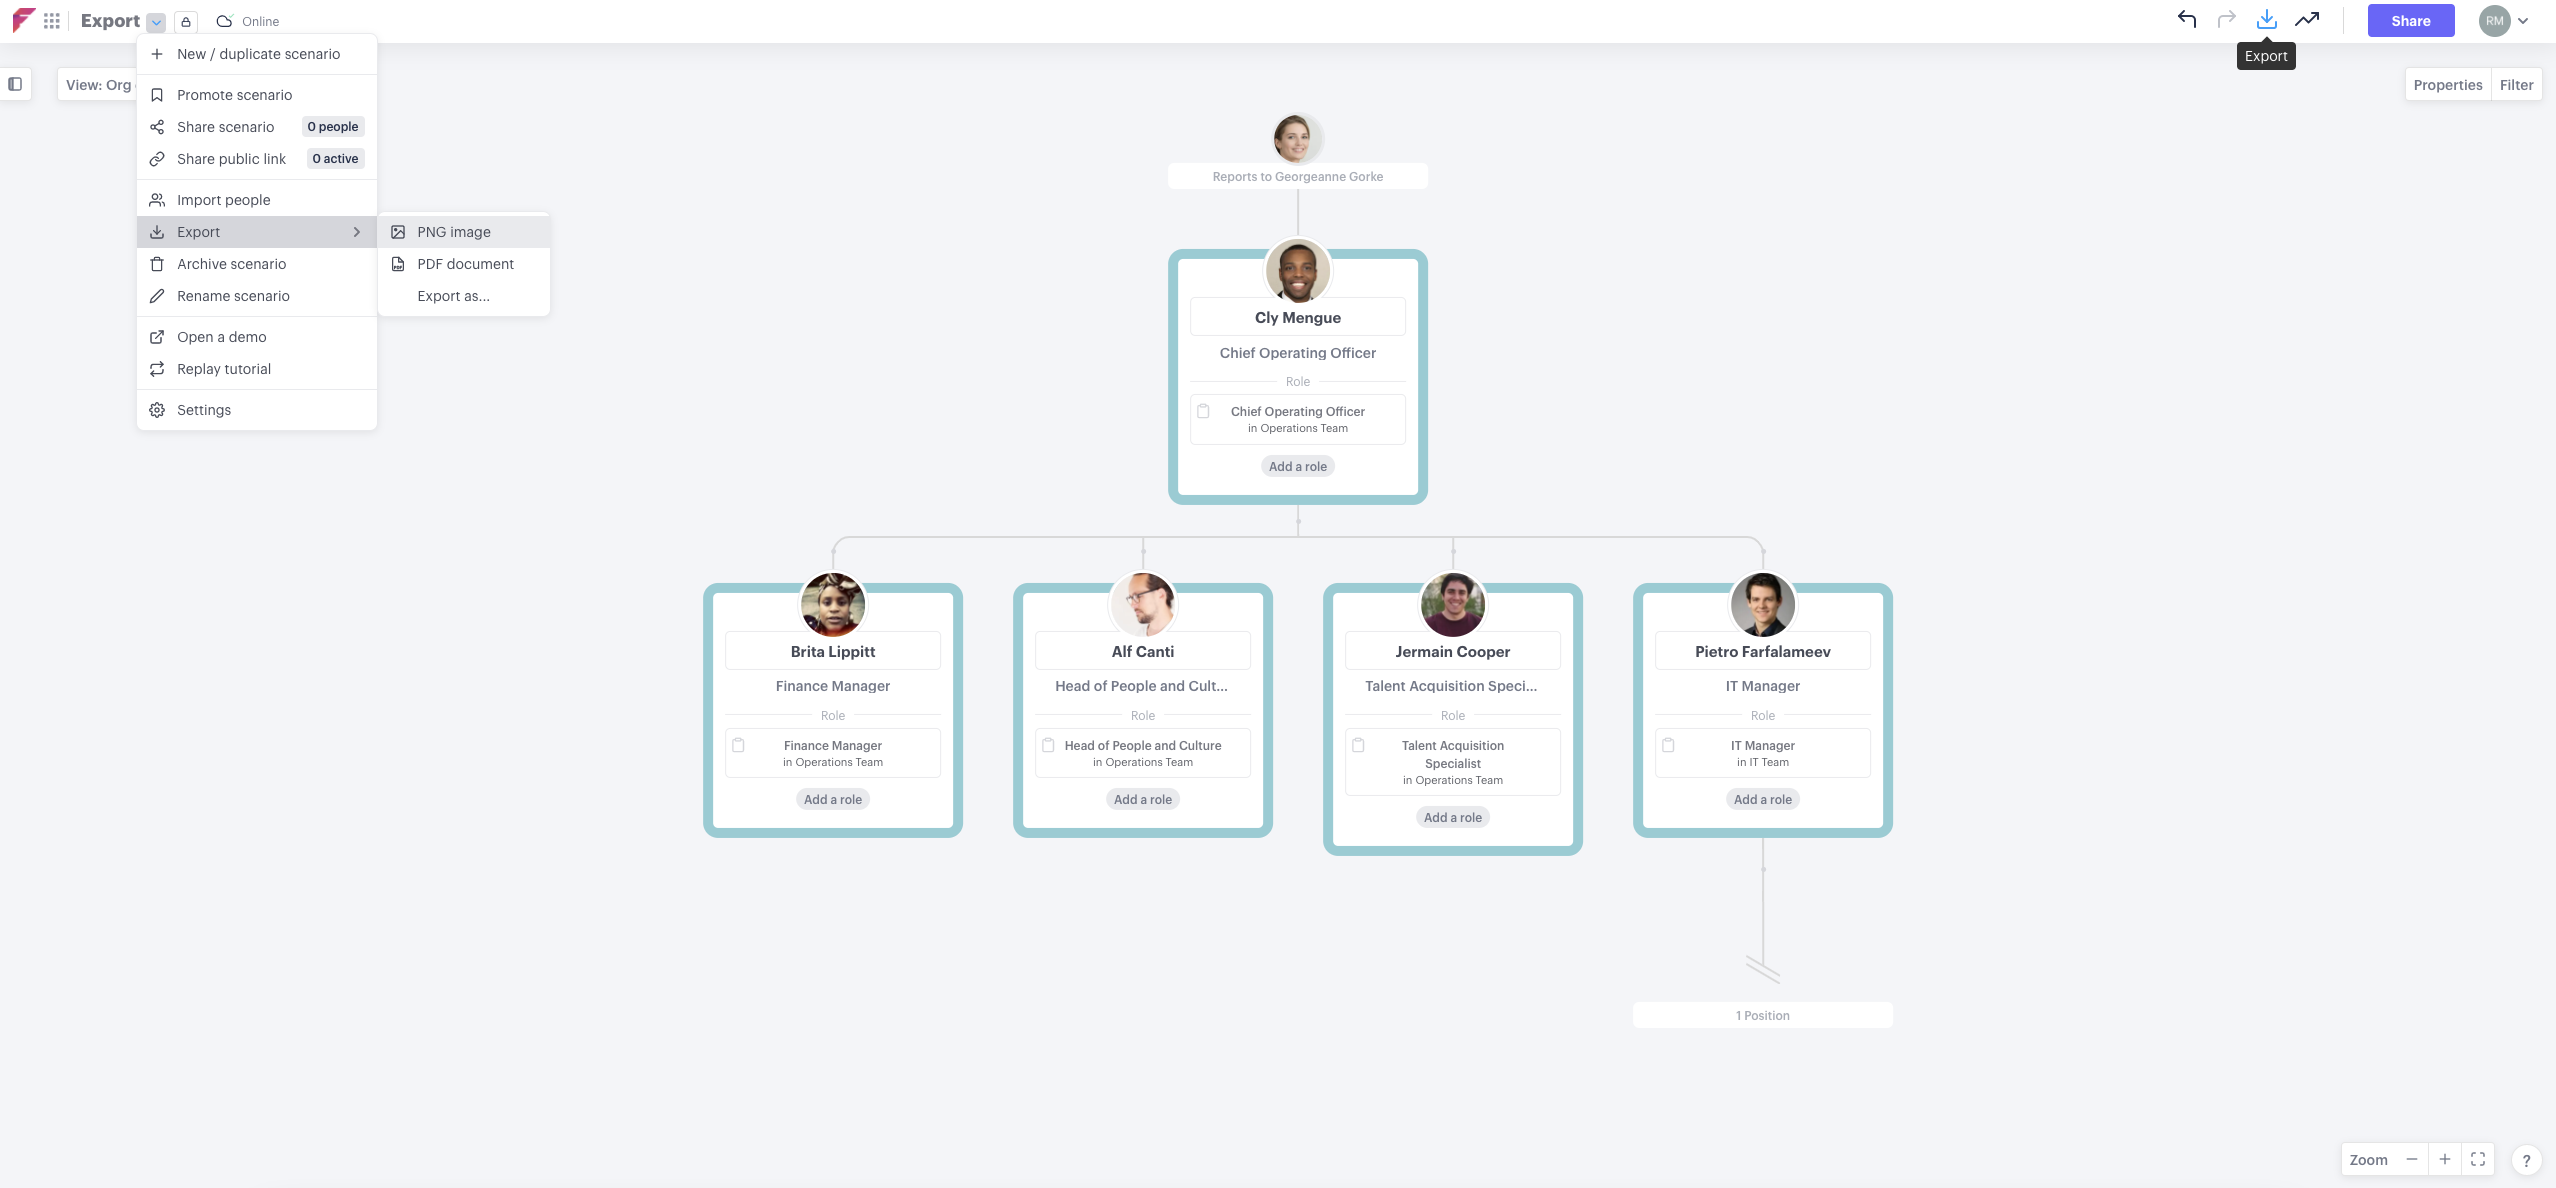 How to export your org chart